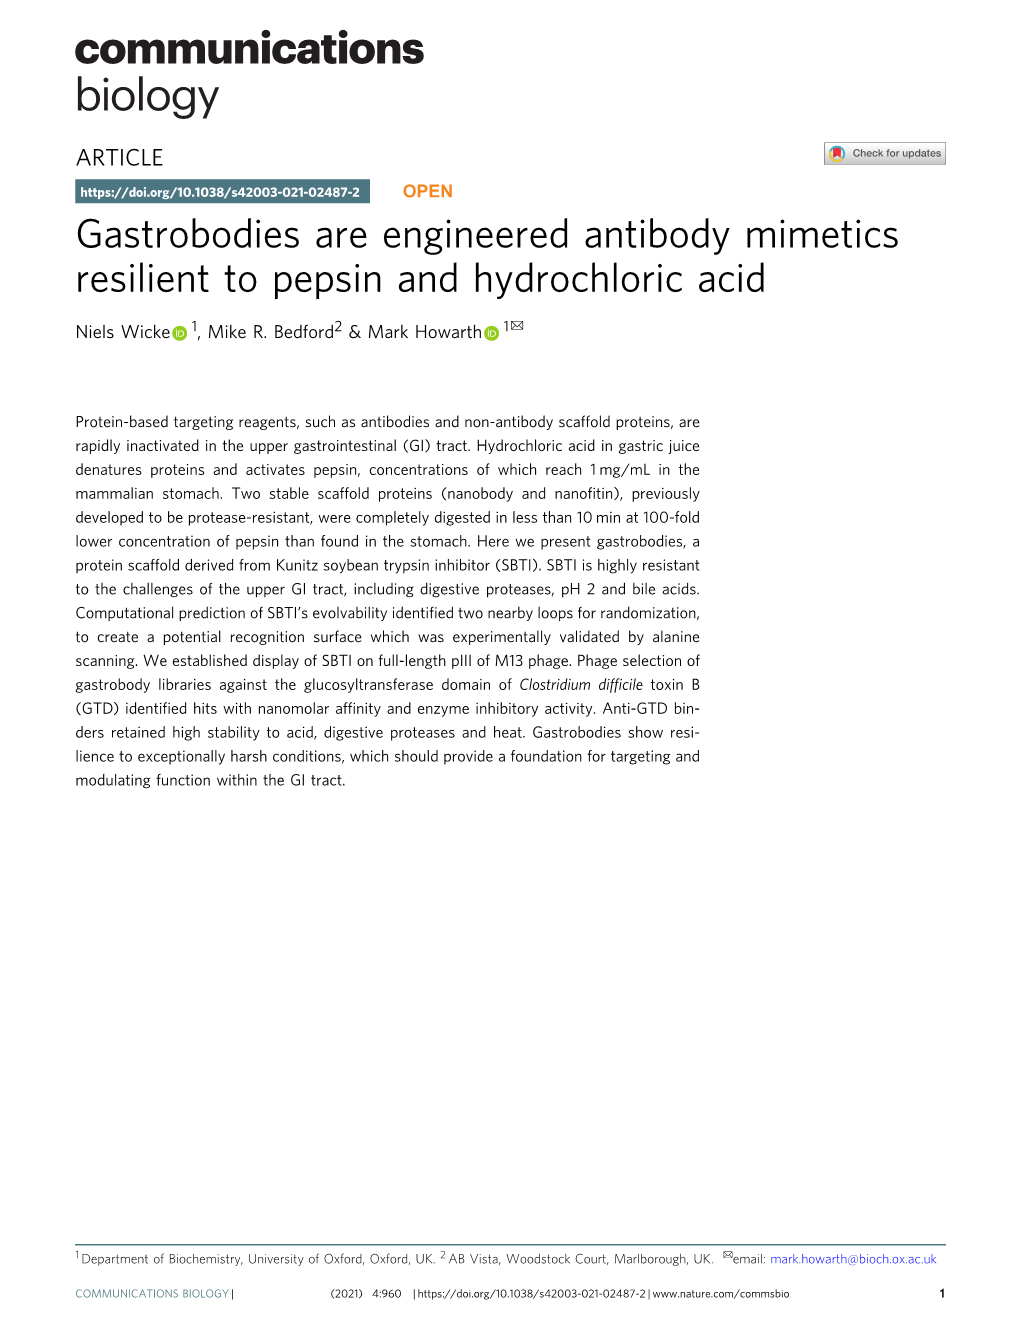 Gastrobodies Are Engineered Antibody Mimetics Resilient to Pepsin and Hydrochloric Acid ✉ Niels Wicke 1, Mike R